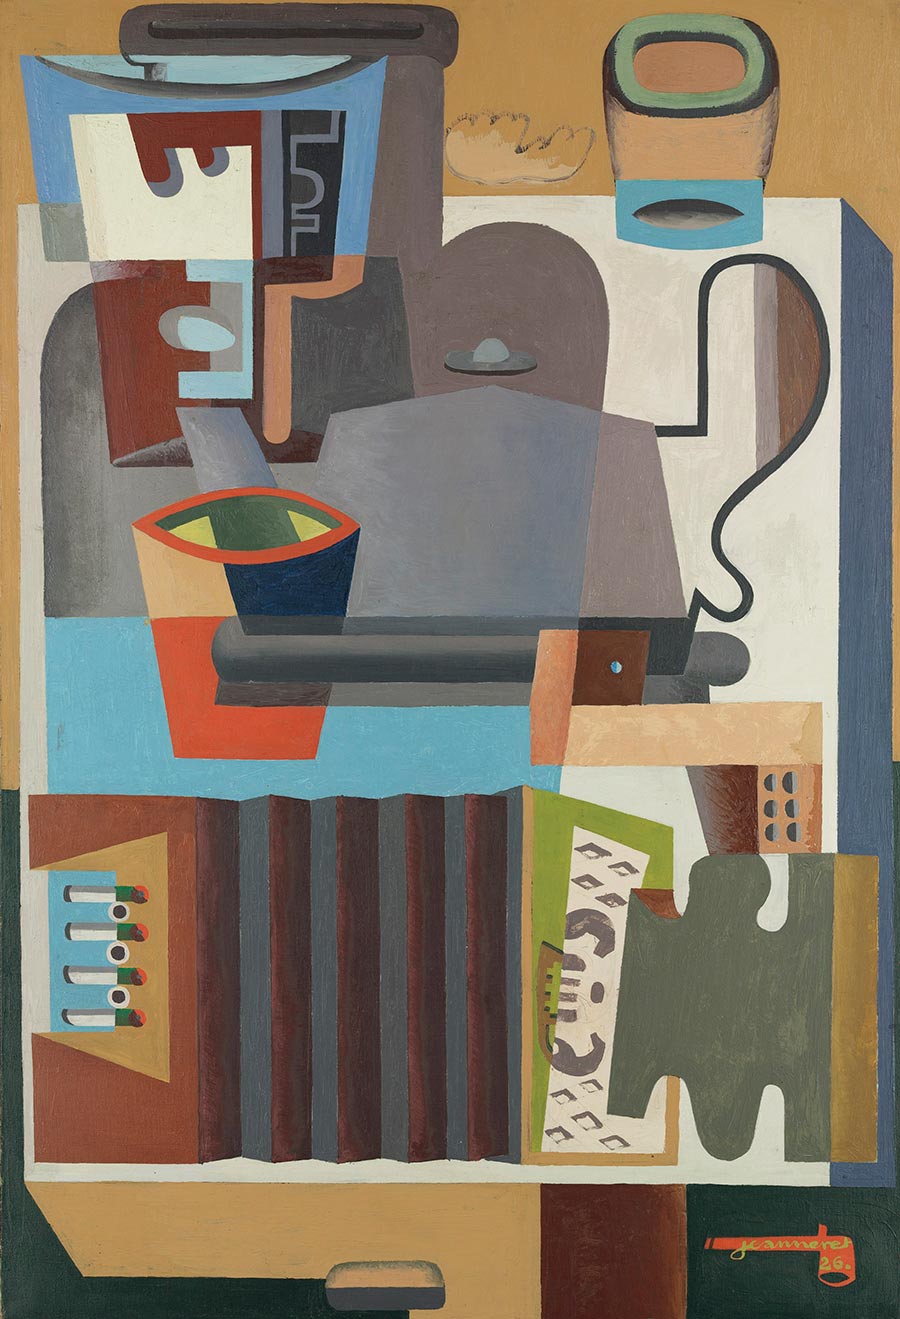 Le Corbusier's paintings, drawings to be auctioned in London